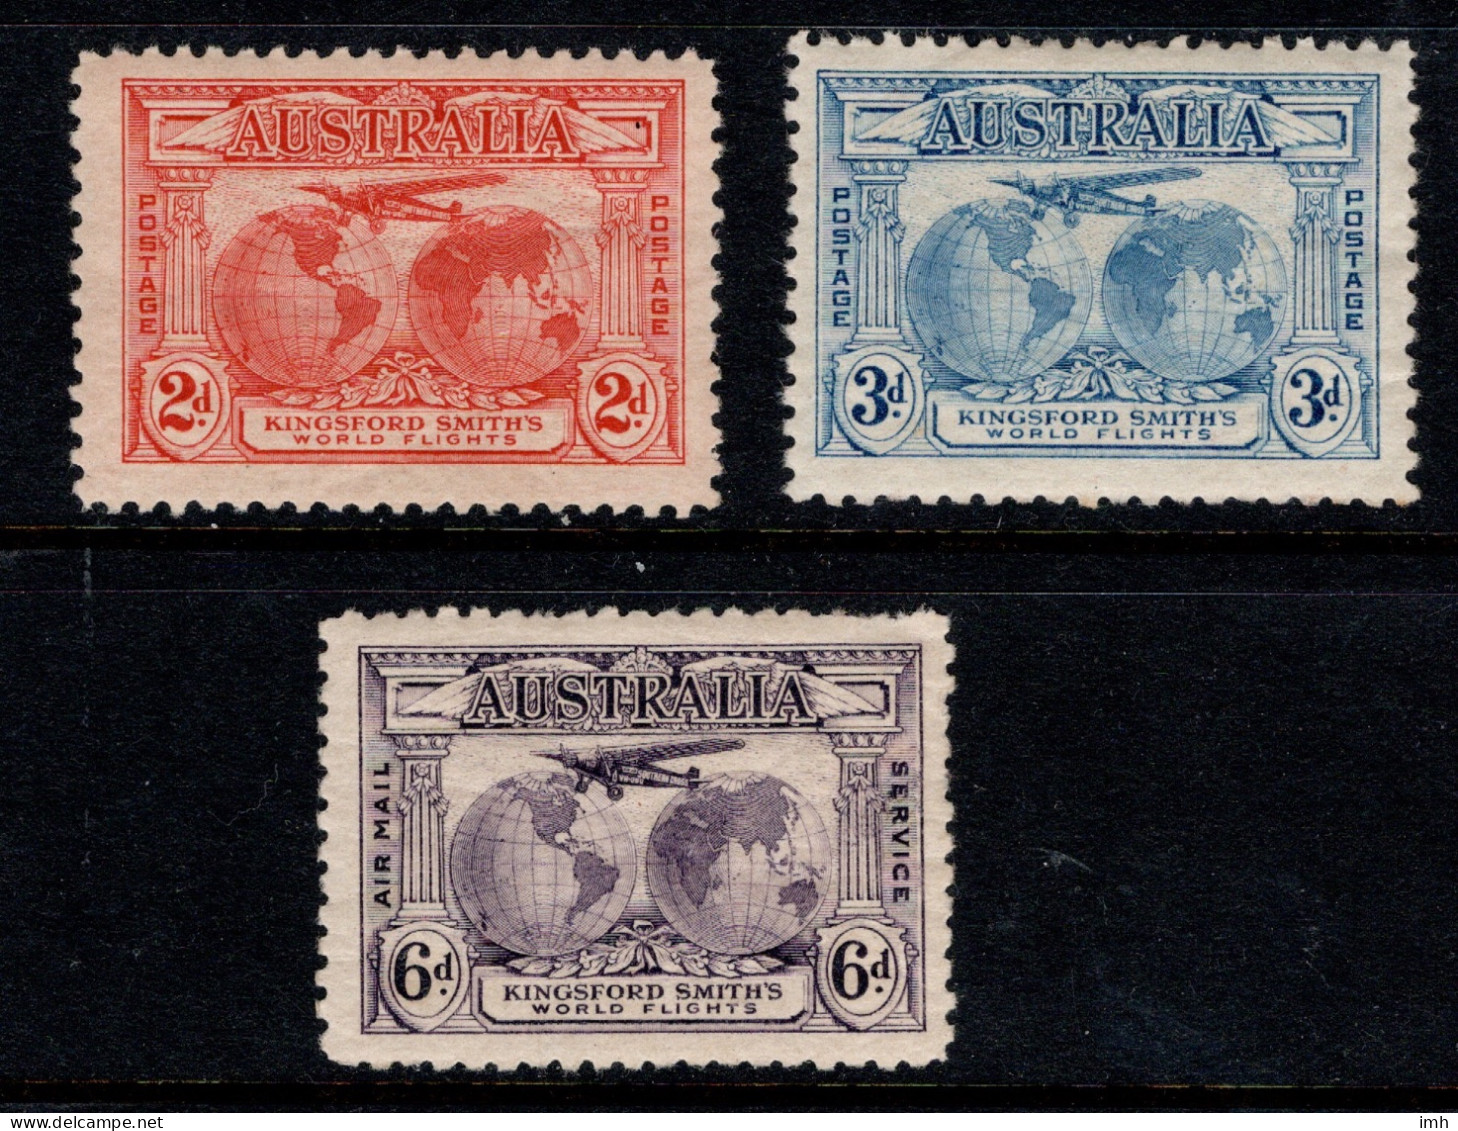 1931 Australia SG 121-123  Kingsford Smith's Flights, Complete Set Airplane, Globes Maps. Mint Lightly Hinged. Cat £15. - Mint Stamps